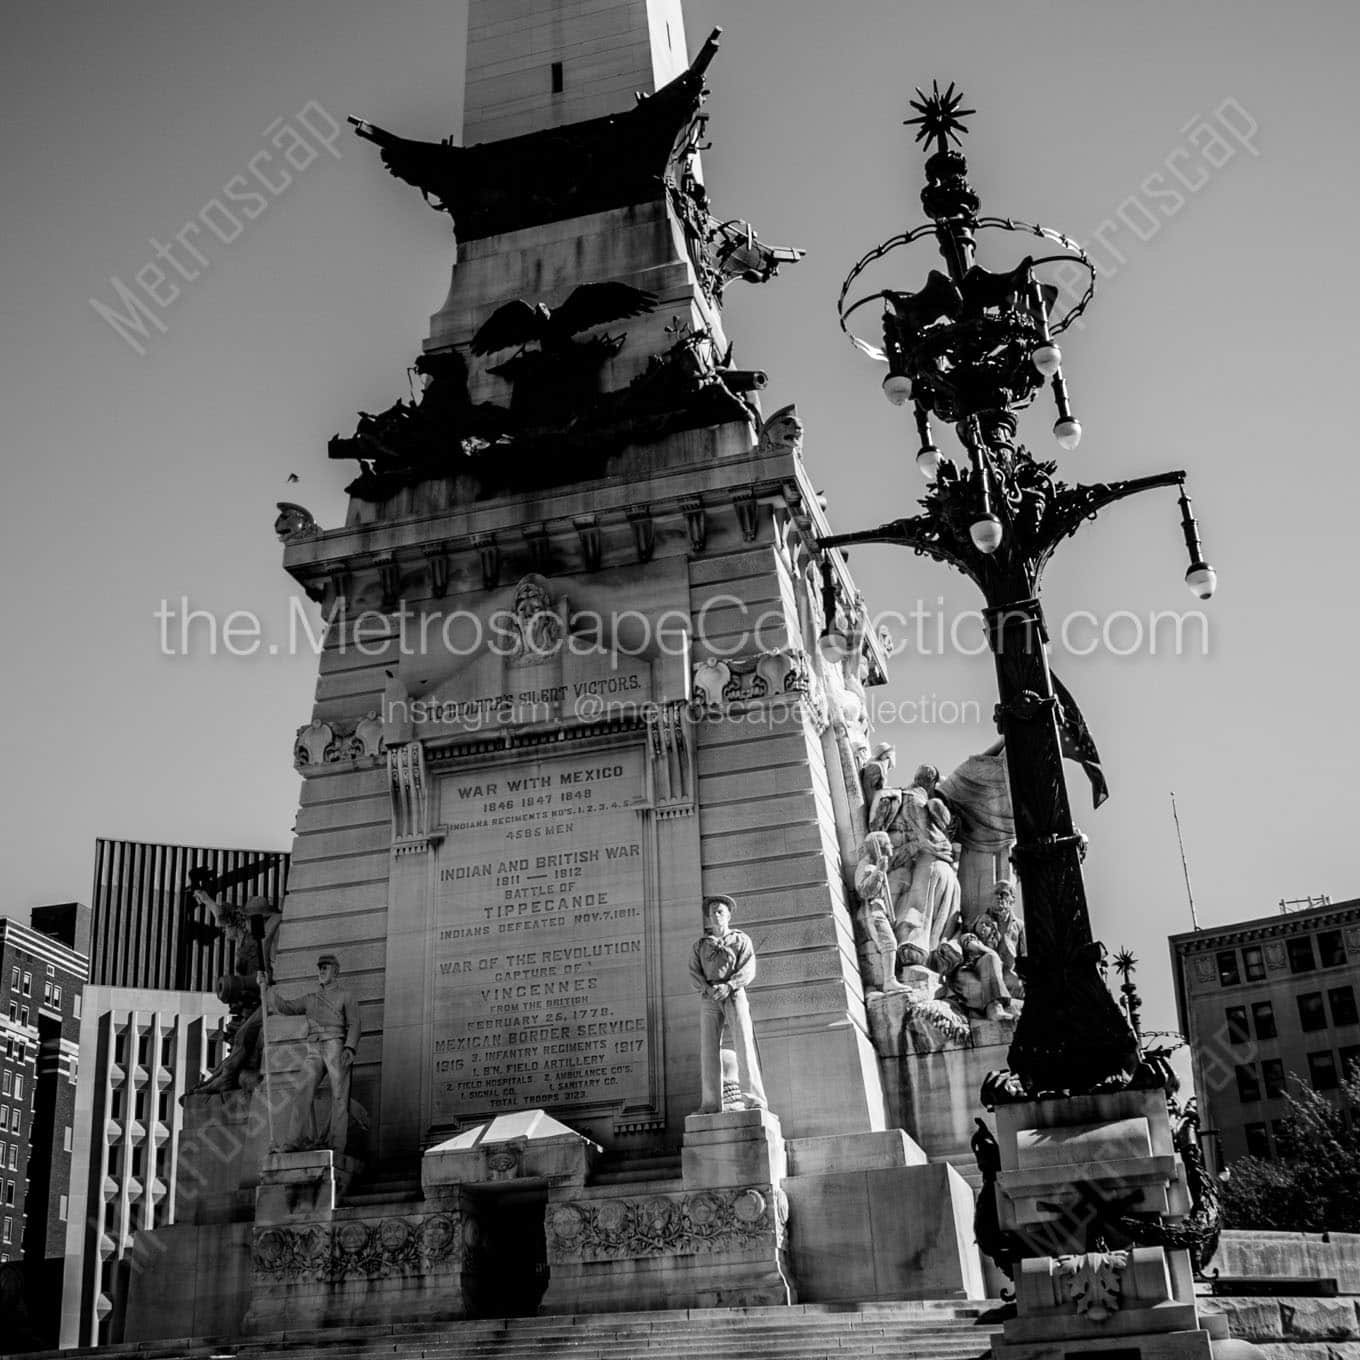 north side soldiers sailors monument Black & White Wall Art